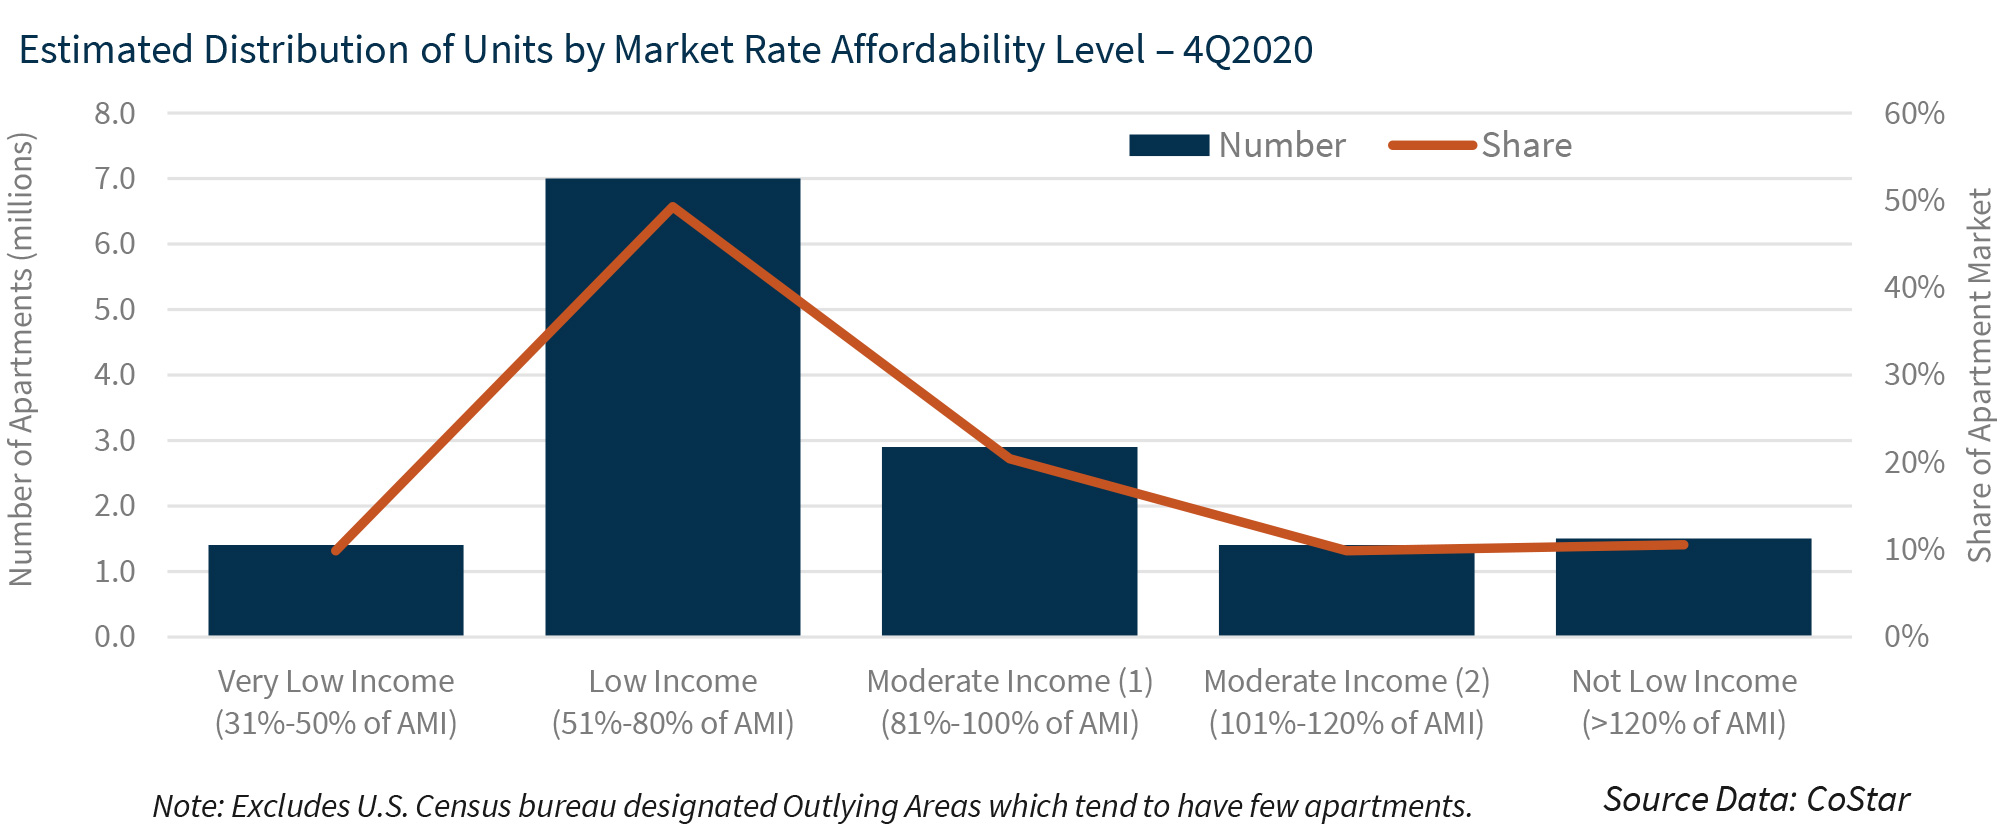 Estimated Distribution of Units by Market Rate Affordability Level – 4Q2020